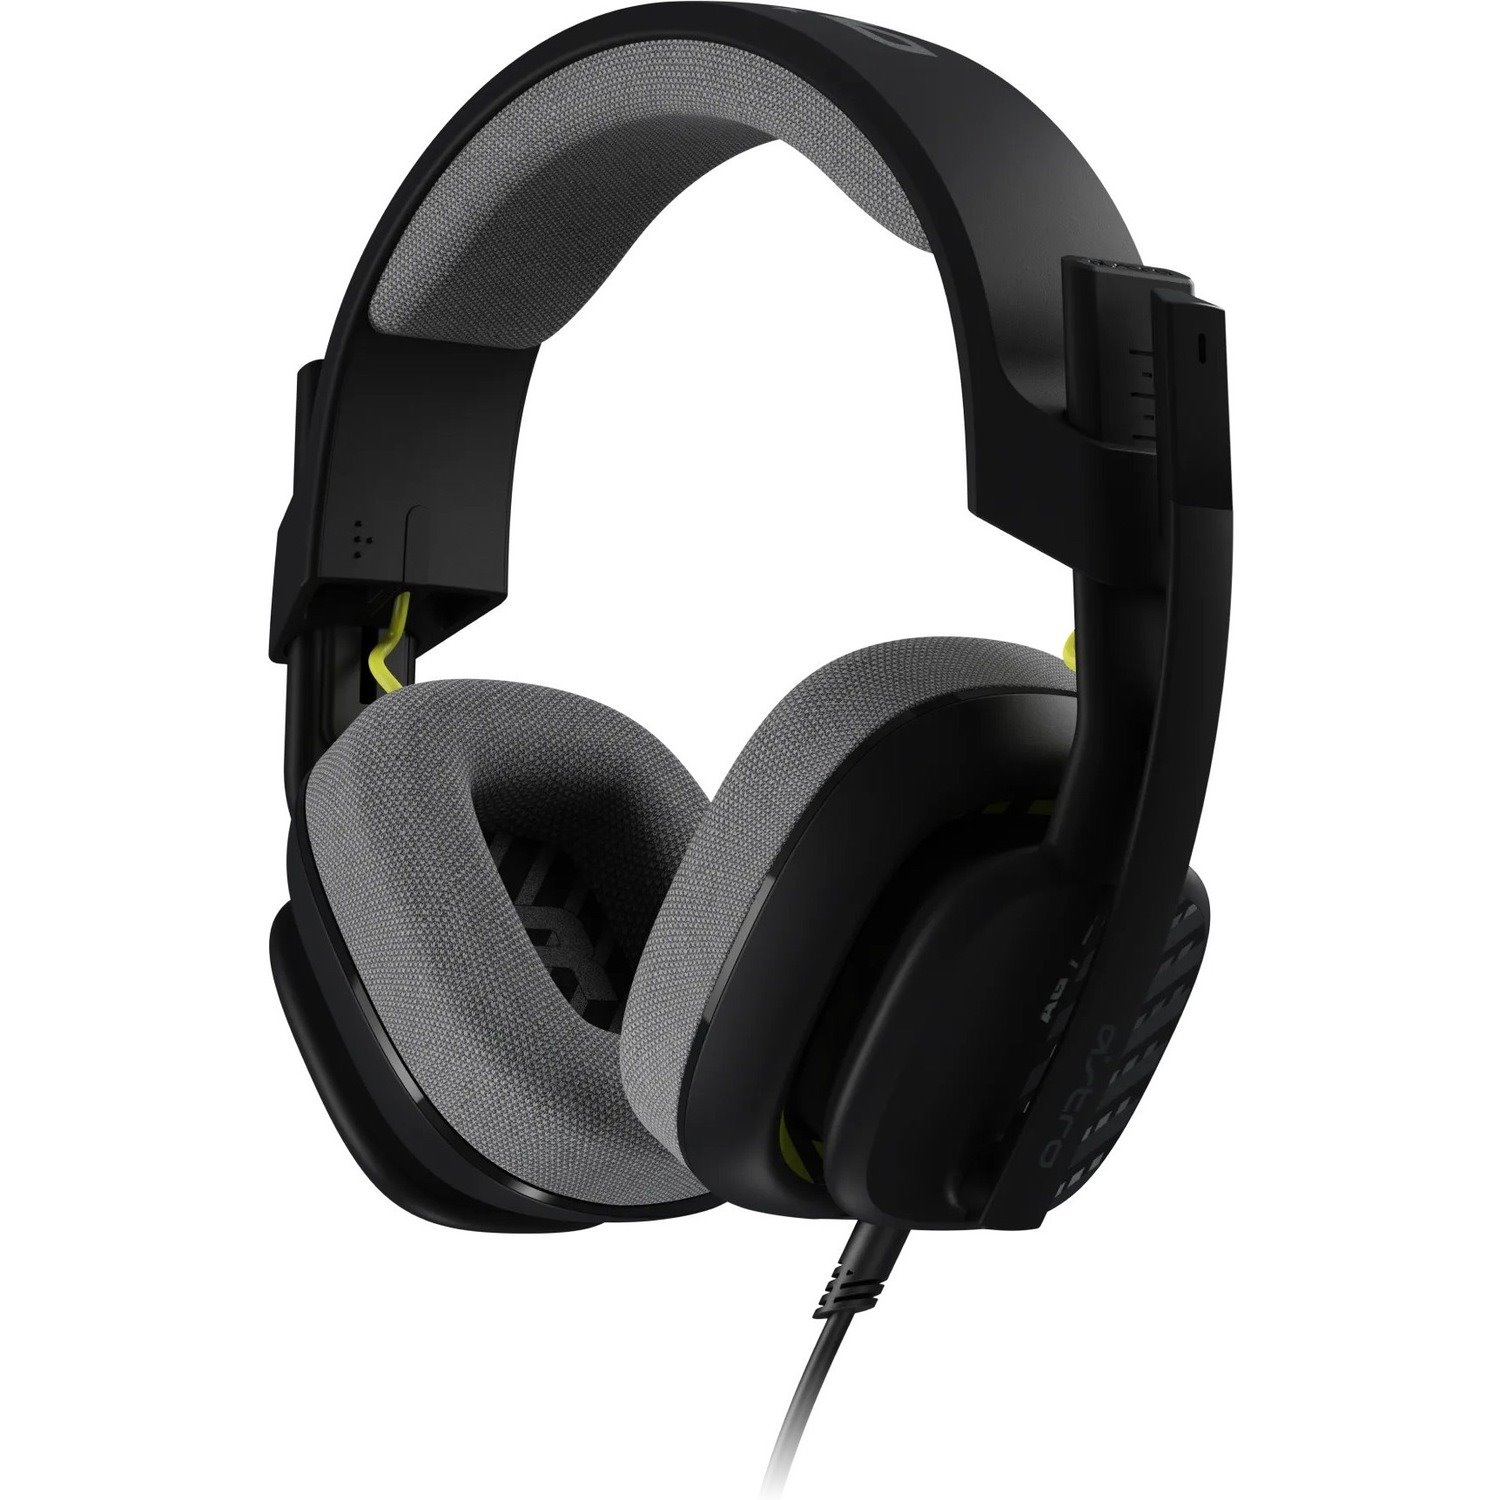 Astro A10 Wired Over-the-head Stereo Gaming Headset - Black